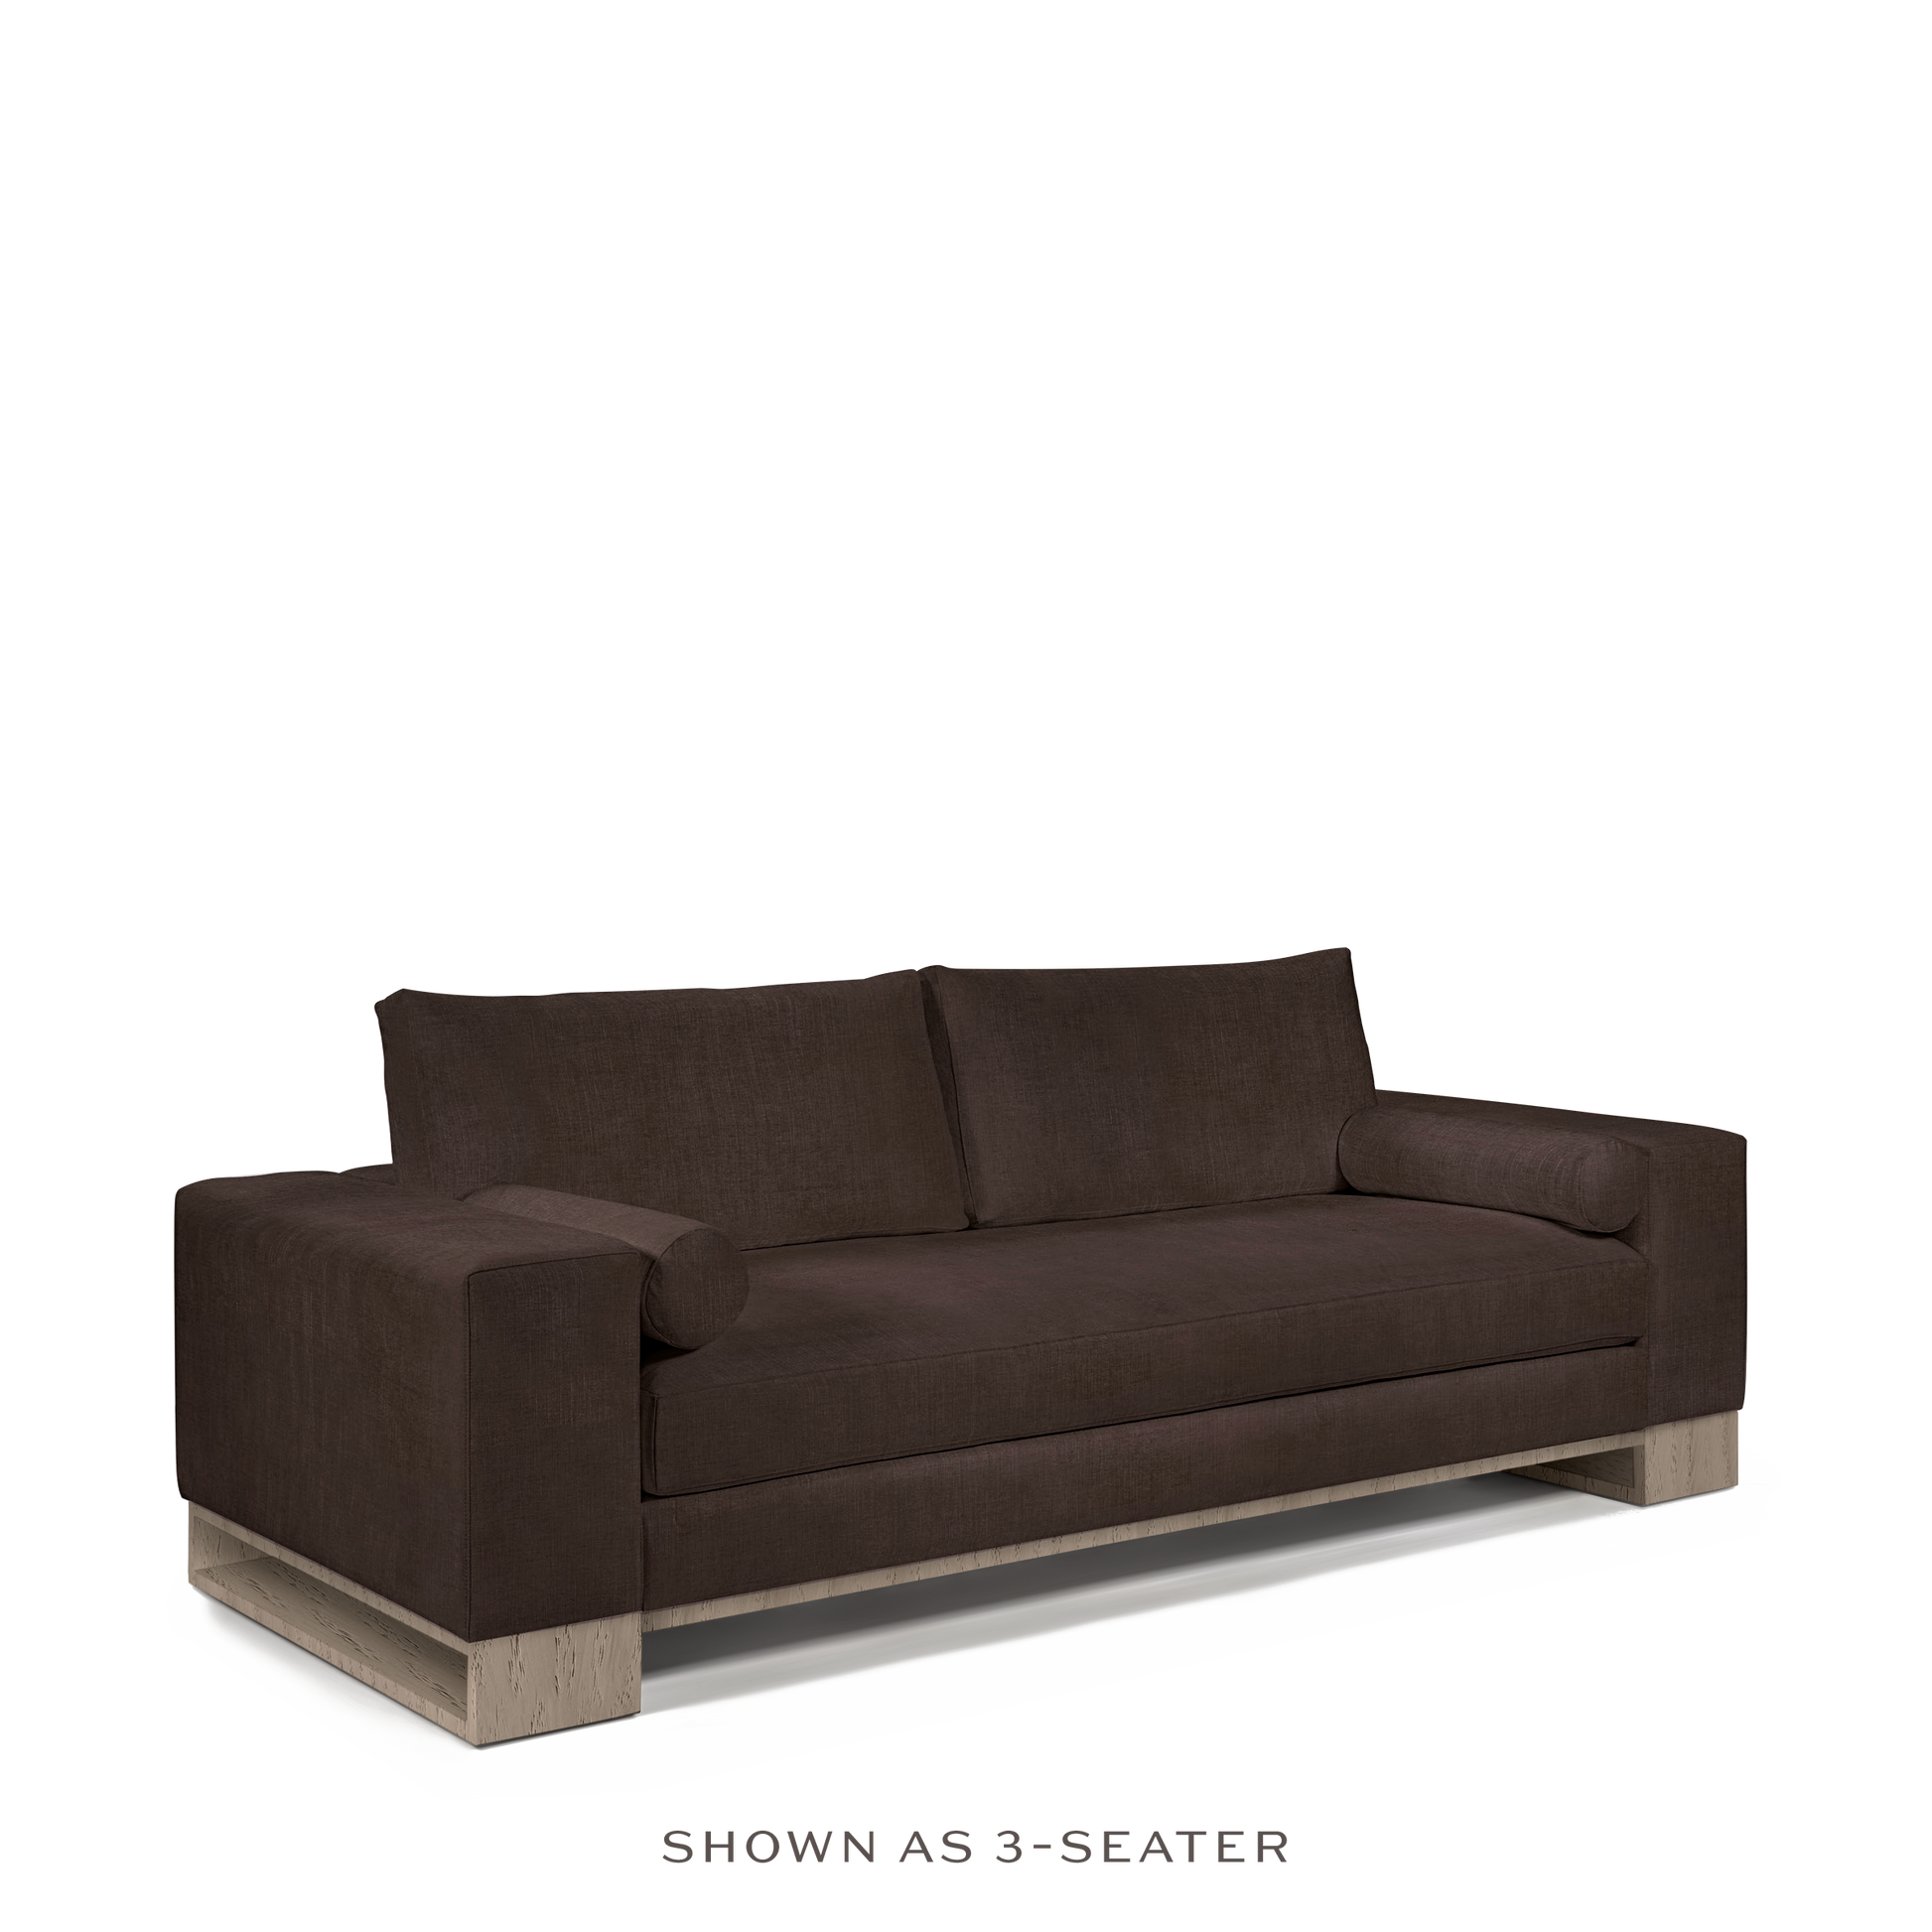 TERRA 3-seater sofa with linara brown textile and natural grey wood legs 